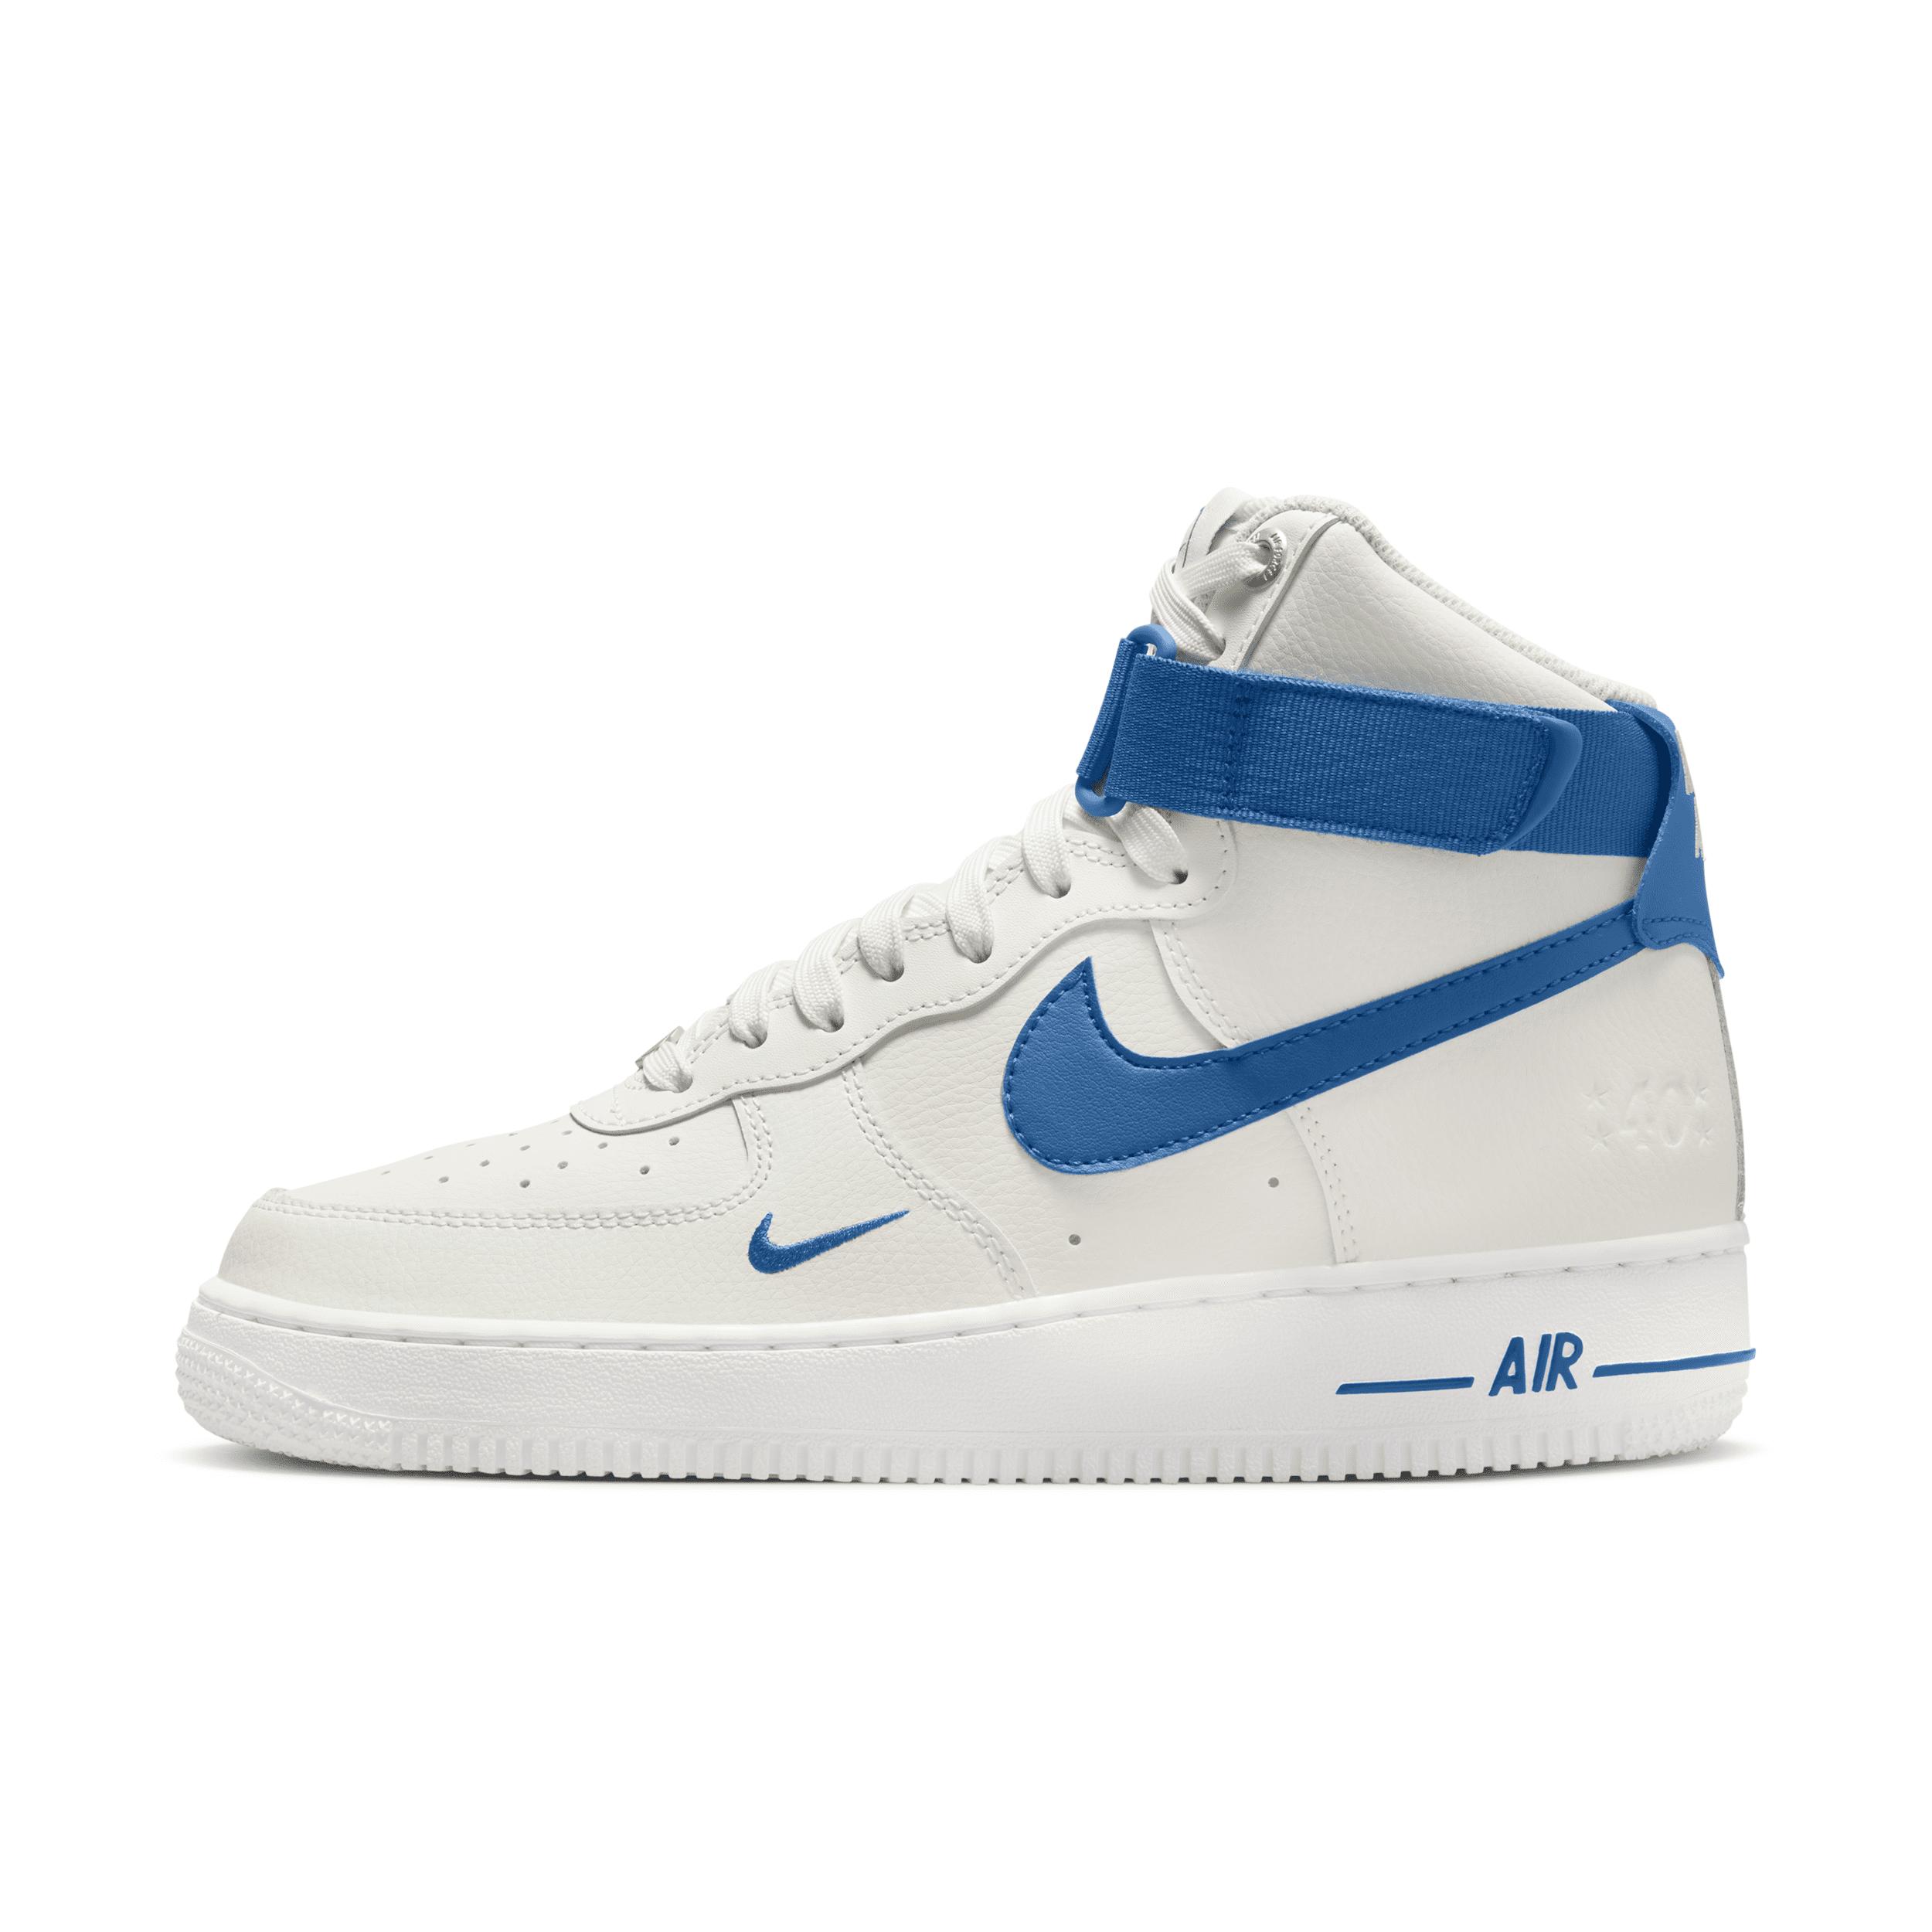 Nike Air Force 1 High Se Shoes in Blue | Lyst